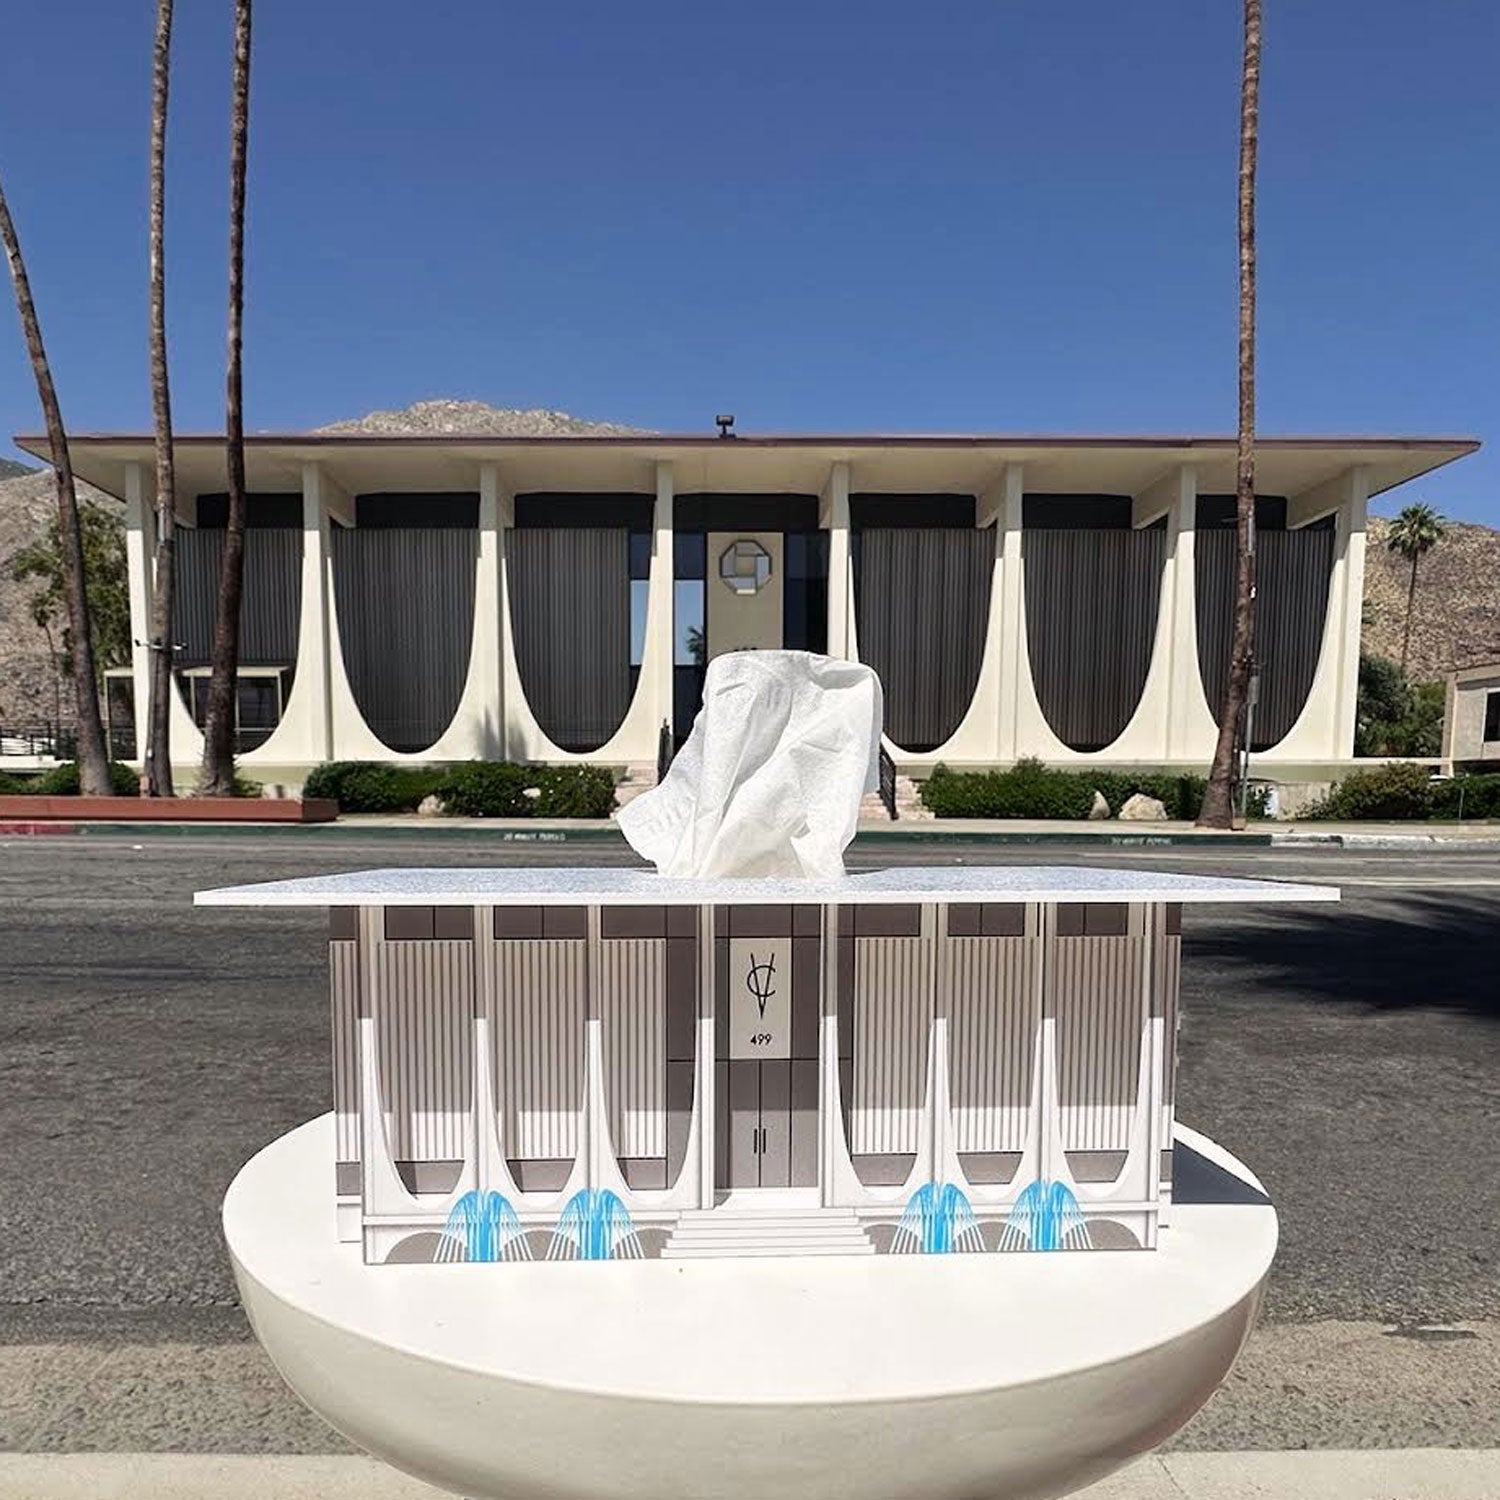 Palm Springs Midcentury Modern Coachella Valley Bank Building and tissue box cover